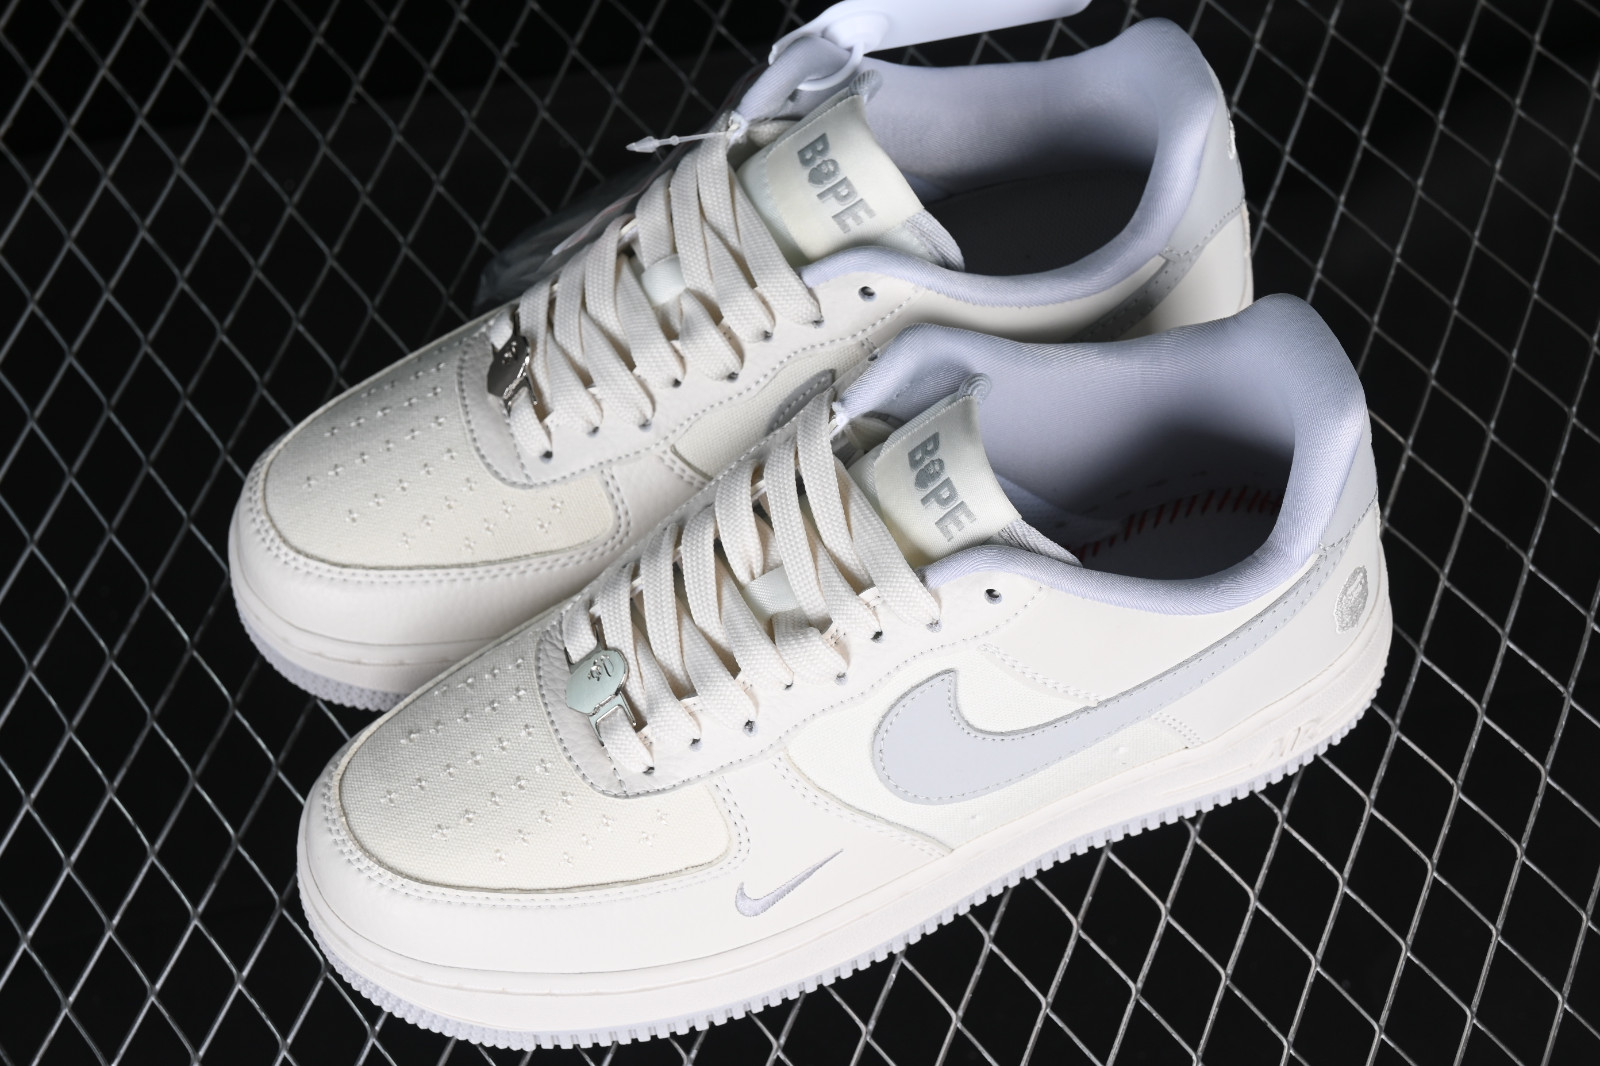 Reiziger vrije tijd idee 748 - Nike Tanga 3 Unidades - MultiscaleconsultingShops - BAPE x Nike Air  Force 1 07 Low Light Grey Rice White BS9055